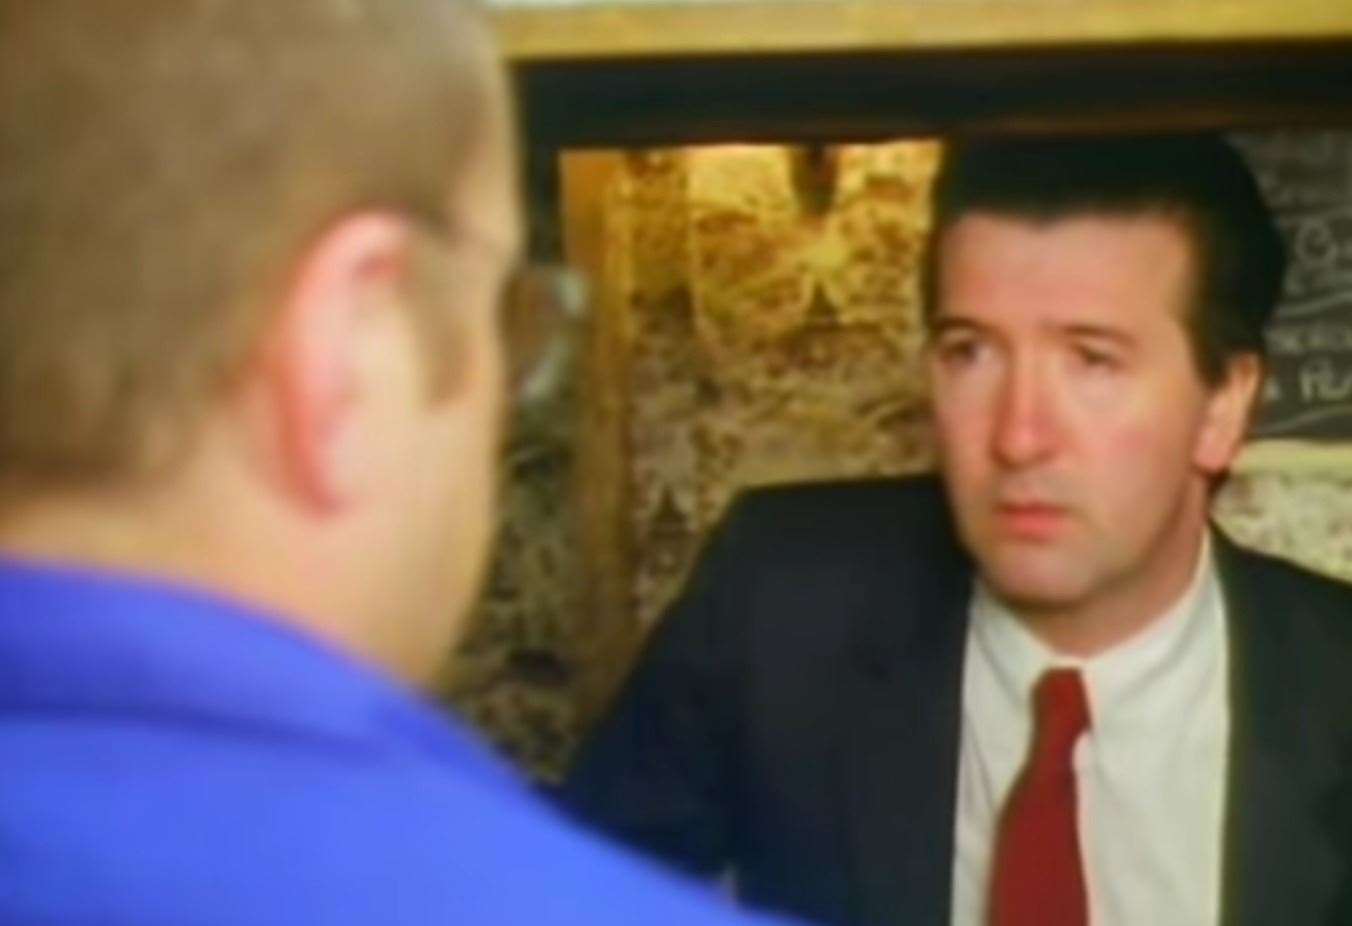 A still from the reconstruction. The actor in the red tie is portraying the man who inquired about Alan three weeks before his shooting. Picture: Crimewatch/redcard74 YouTube channel